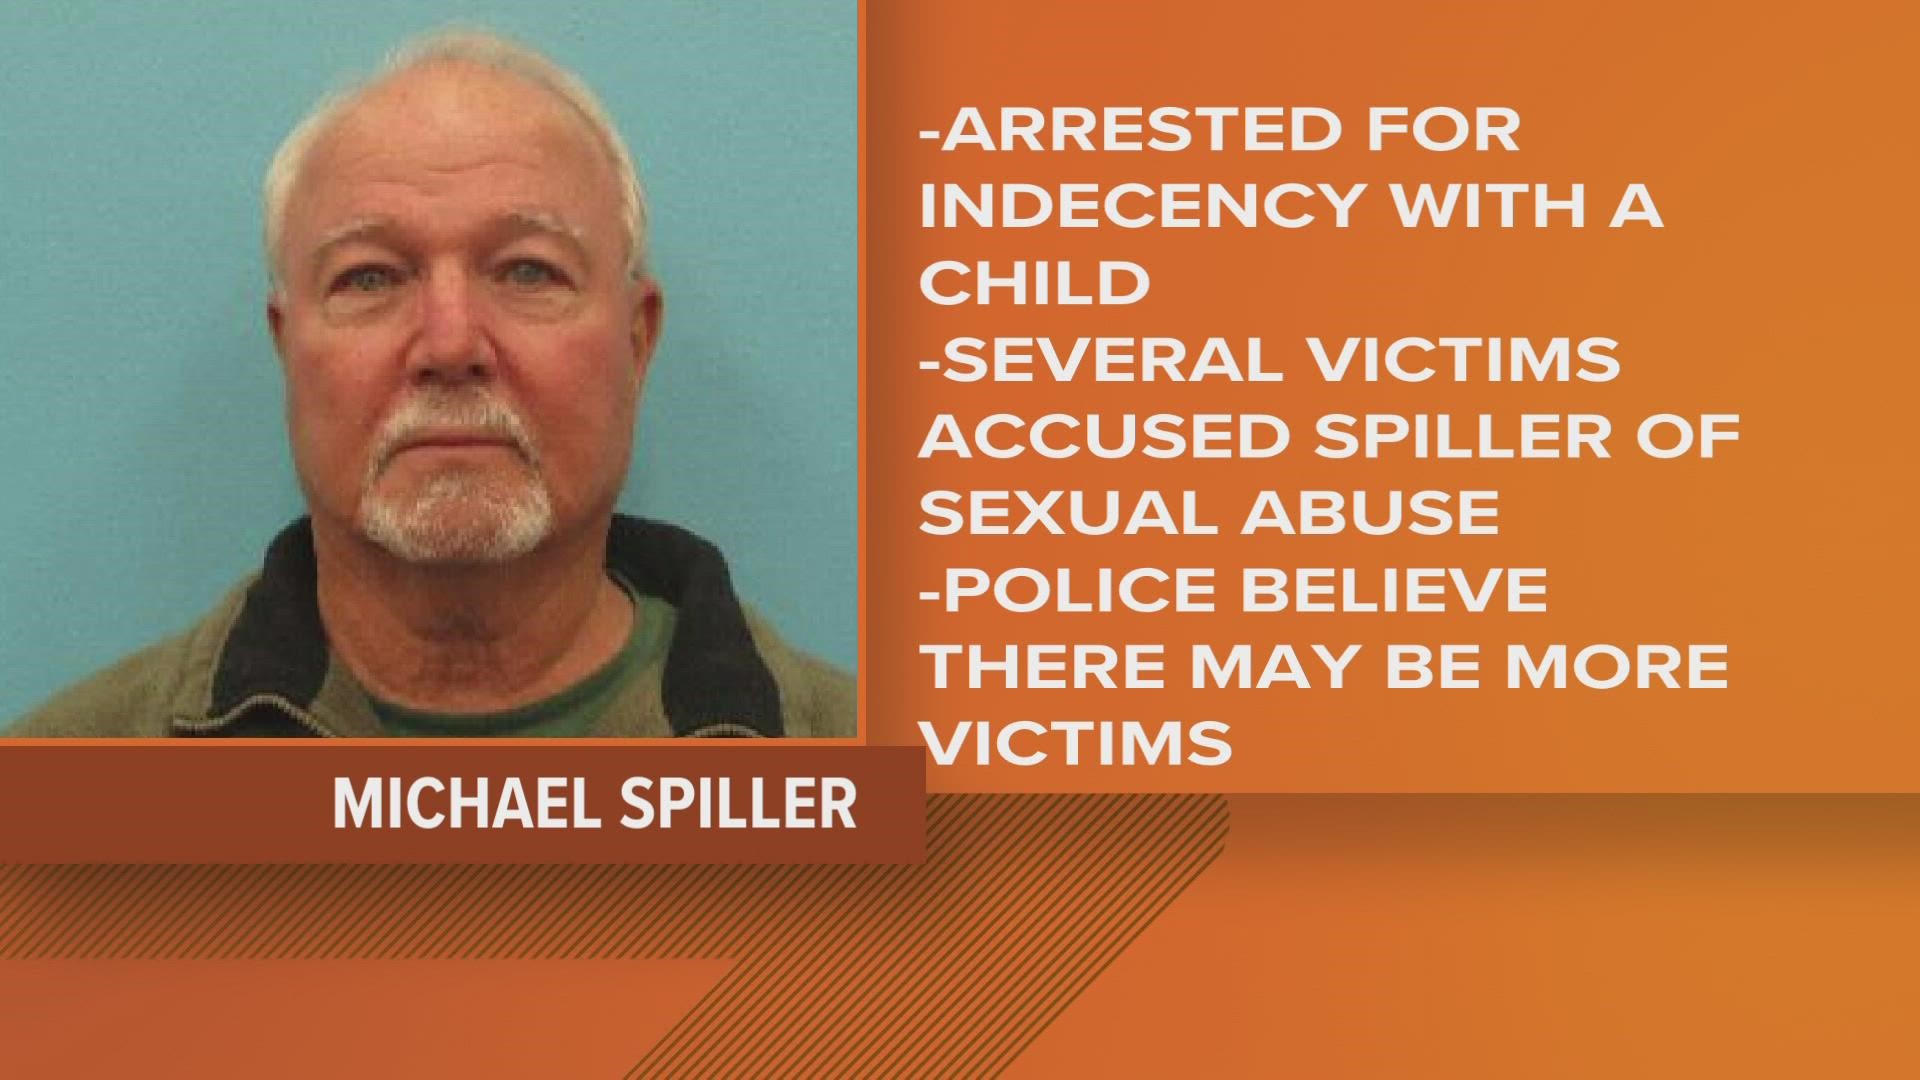 Michael Spiller, 74, was arrested on Nov. 18. The Kendall County District Attorney's Office believe there are more victims.